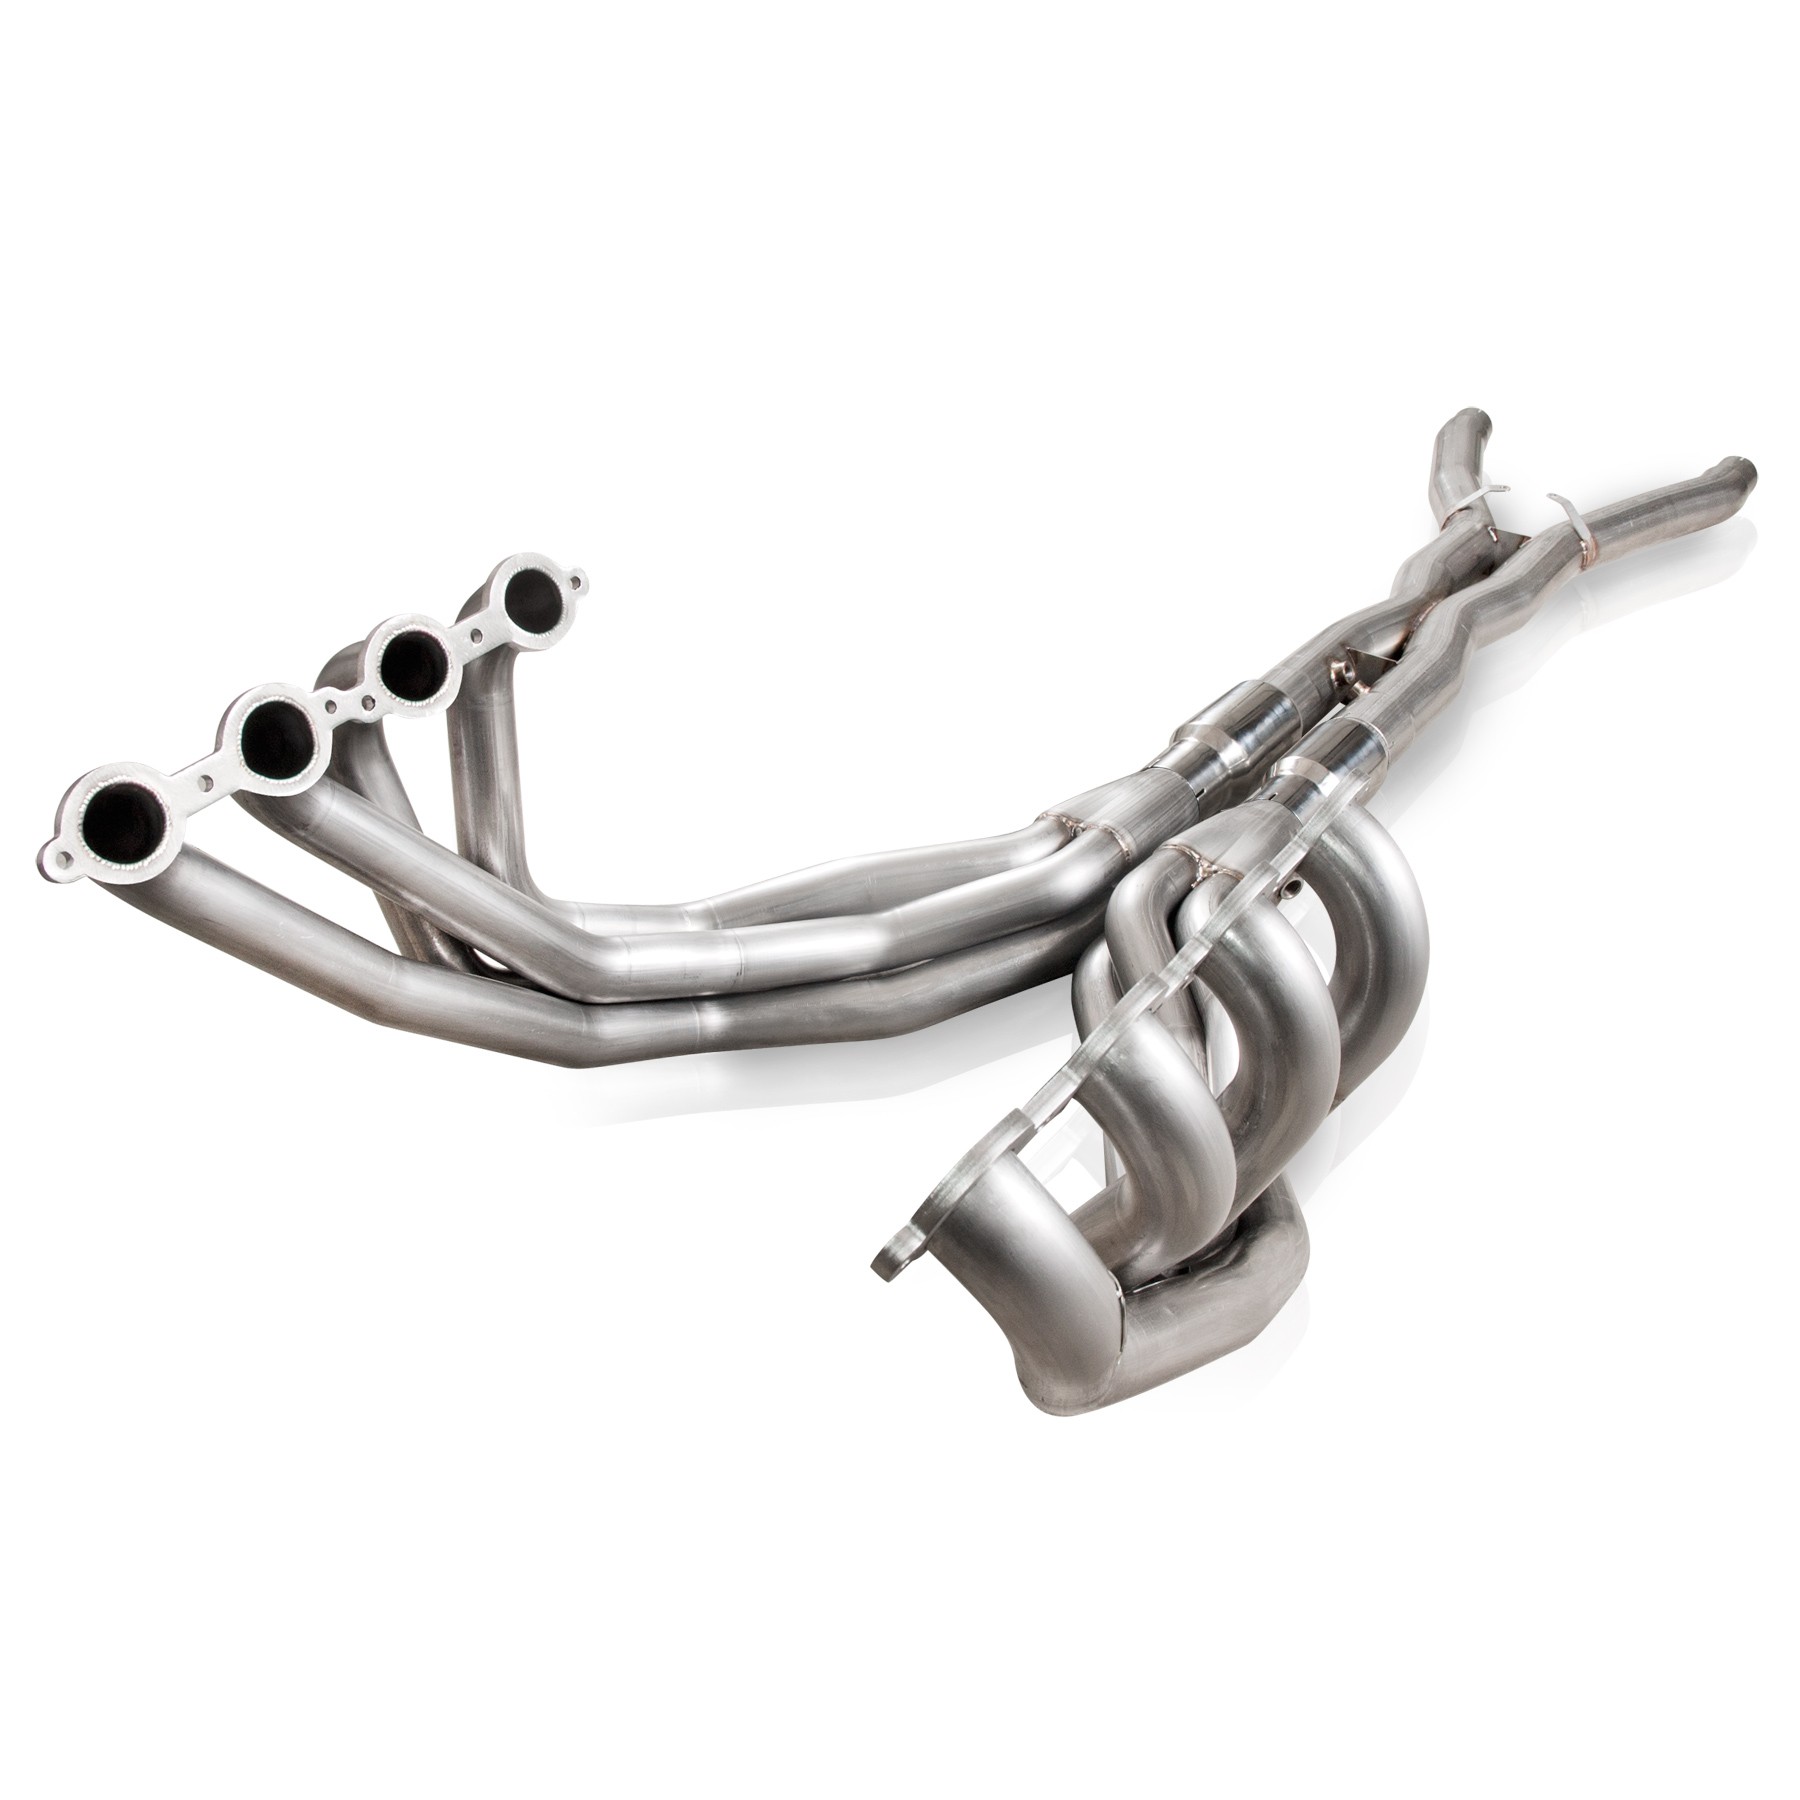 2009-2013 Corvette C6 Stainless Works 2" Long Tube Headers w/Catted 3" Xpipe